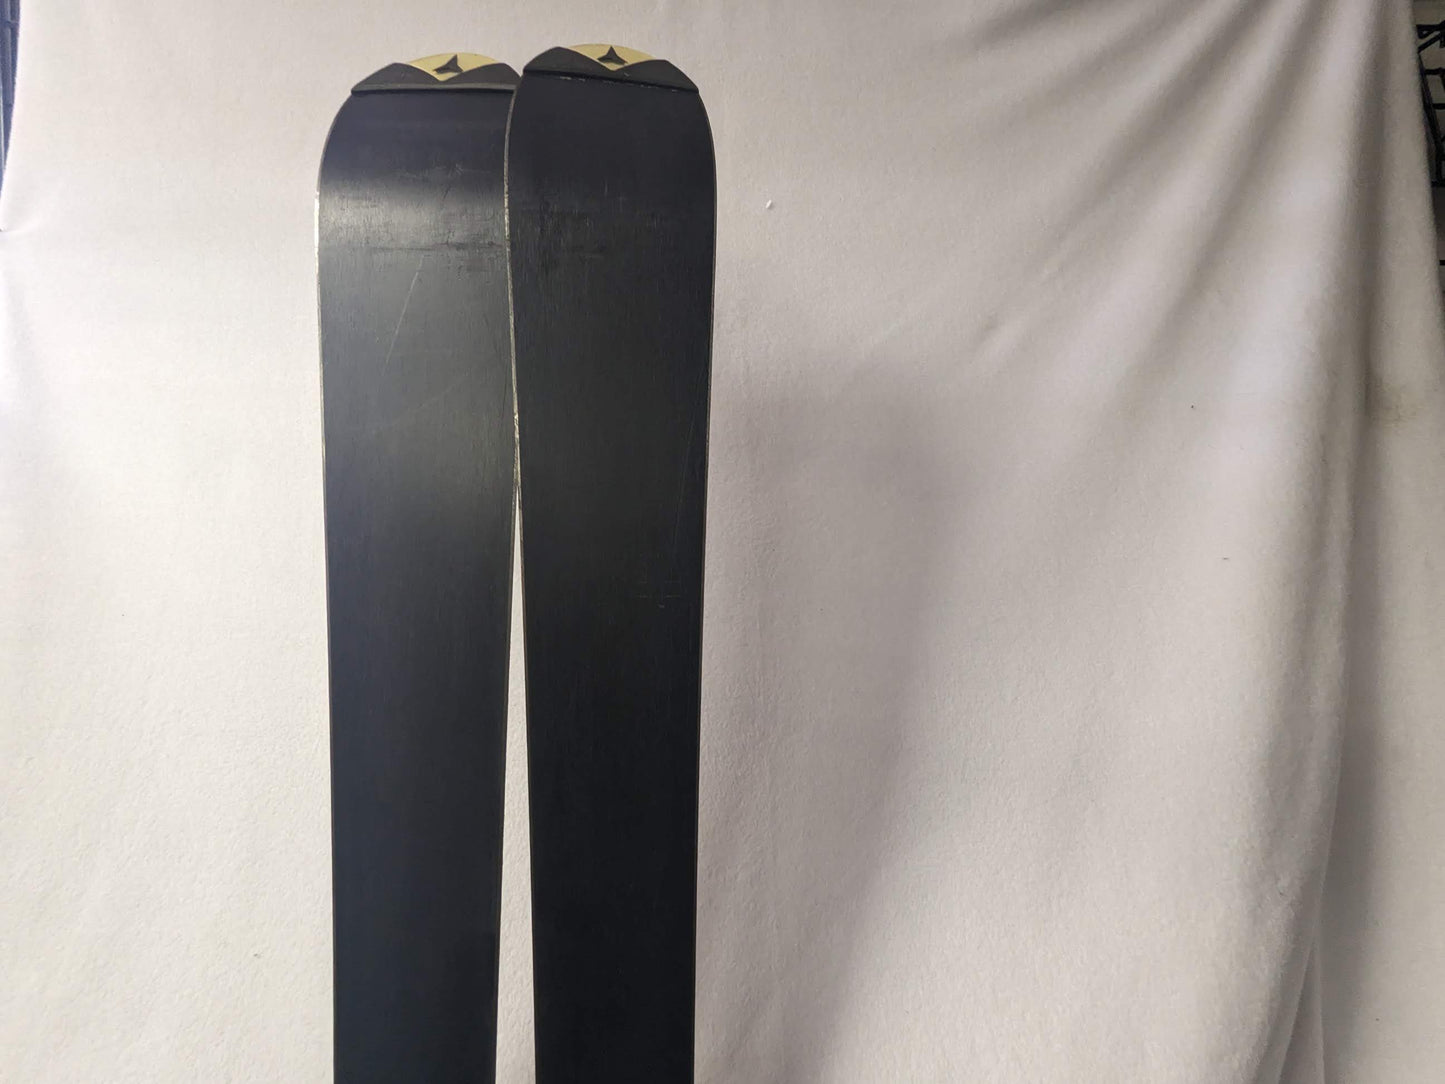 Atomic Beta Carv 8.18 Skis w/Atomic Bindings Size 170 Cm Color Gray Condition Used